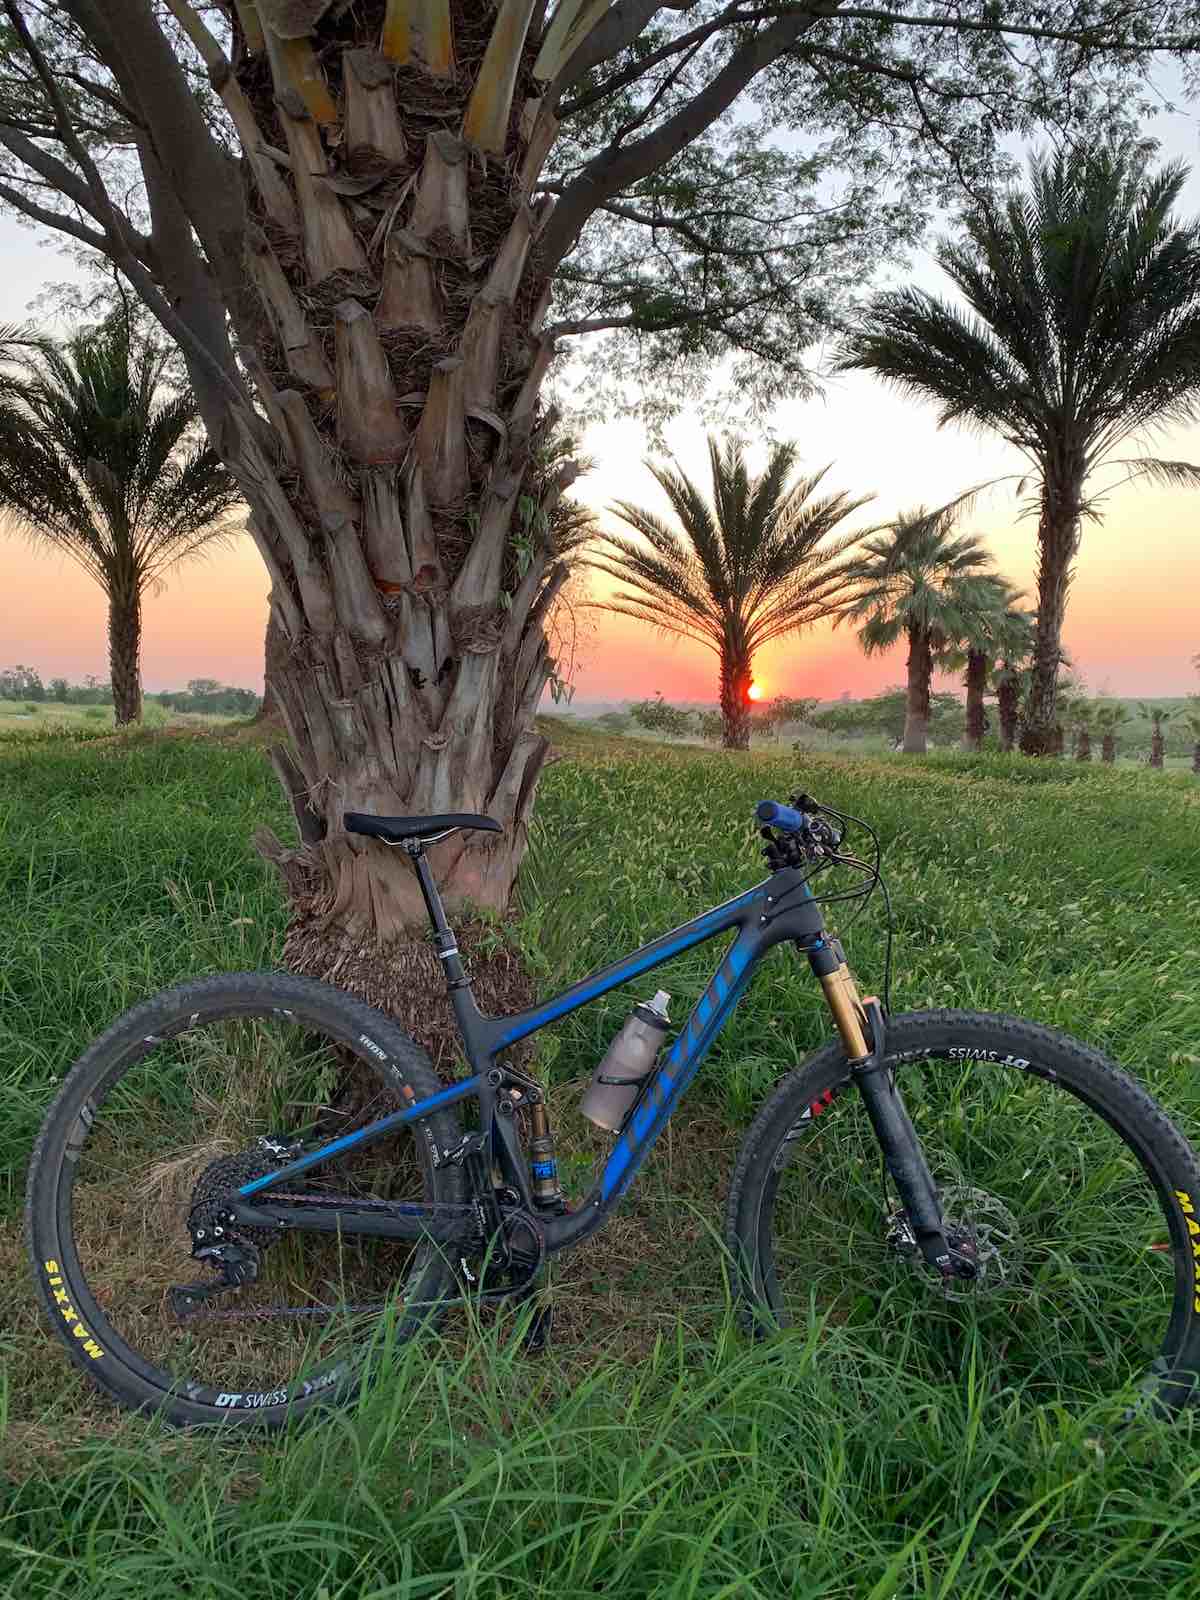 bikerumor pic of the day pivot bicycle leaning against a palm tree with green grass surrounding and orange sunset in the distance in Culiacan, Mexico